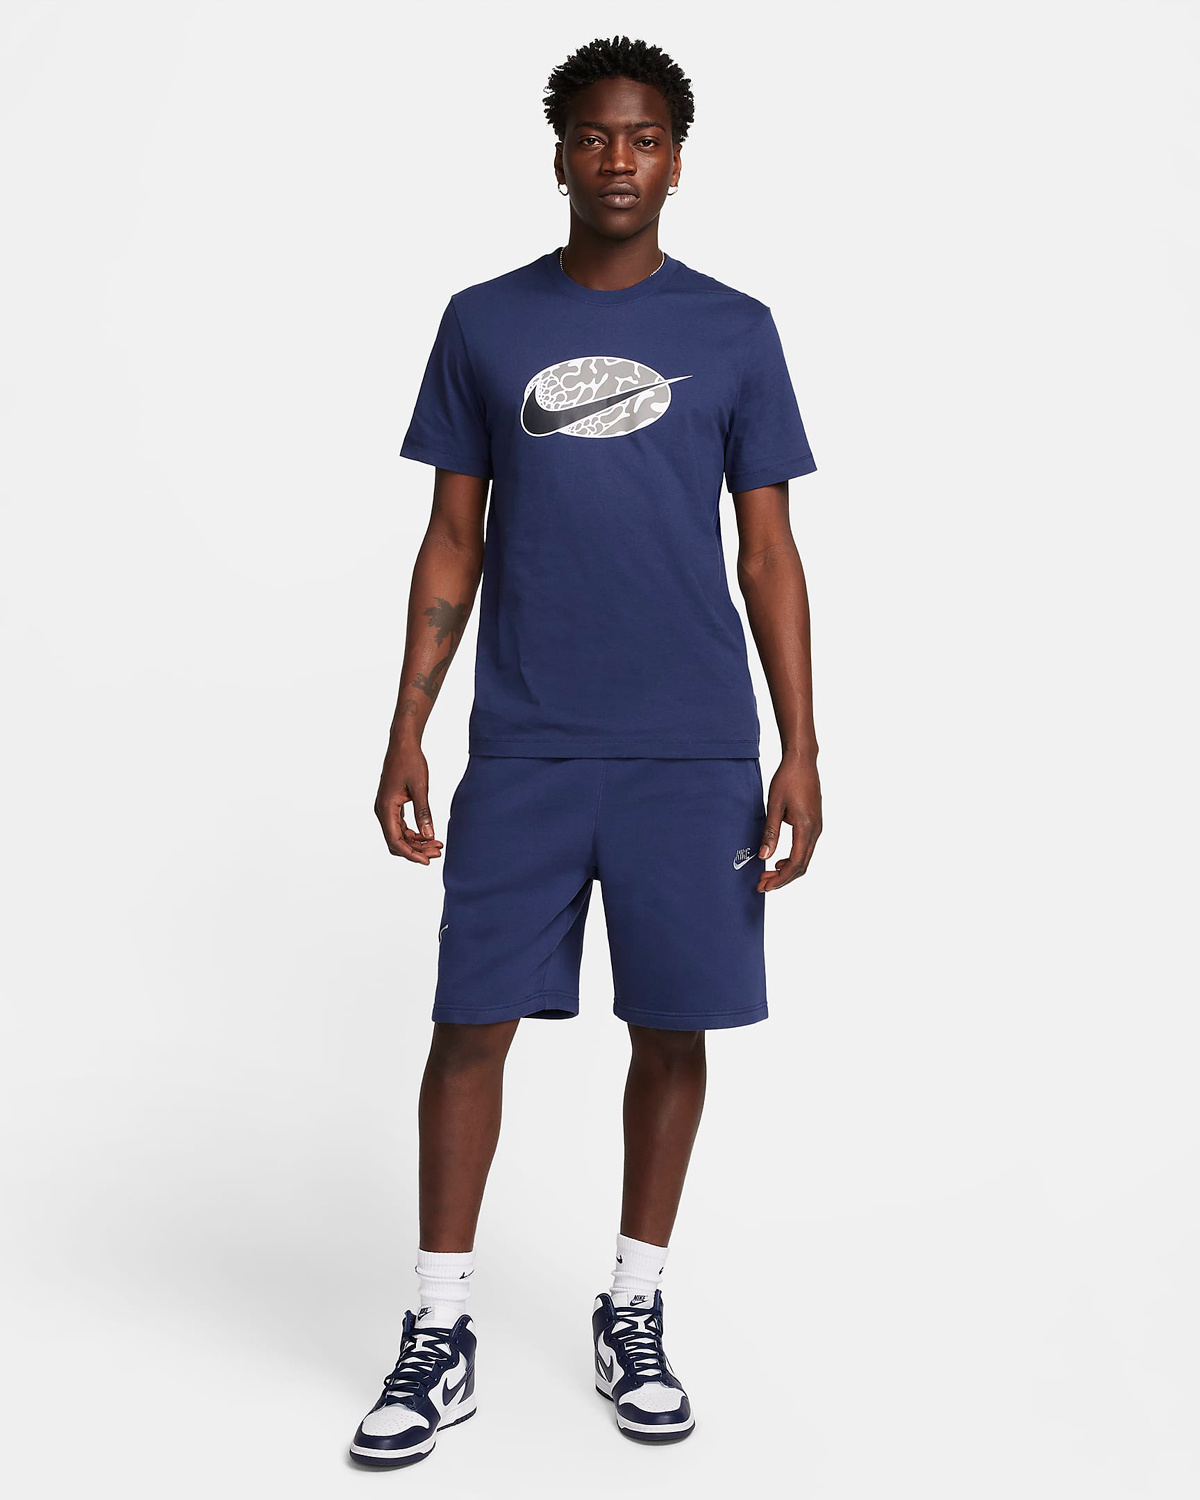 Nike-Sportswear-Midnight-Navy-T-Shirt-Outfit